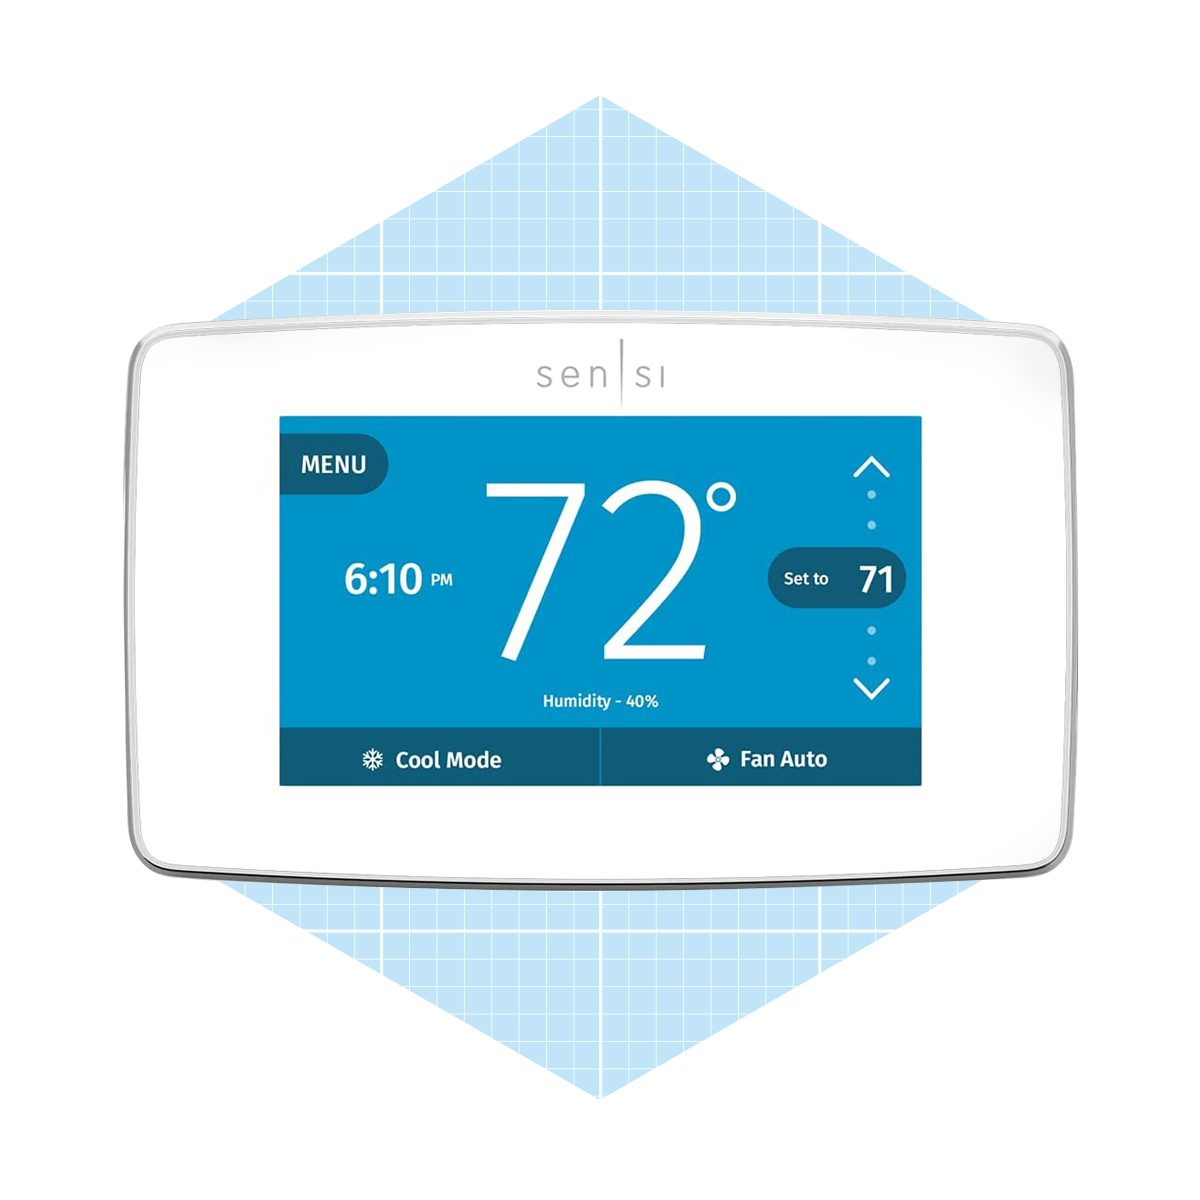 Emerson Sensi Touch Wi Fi Smart Thermostat With Touchscreen Color Display Ecomm Amazon.com